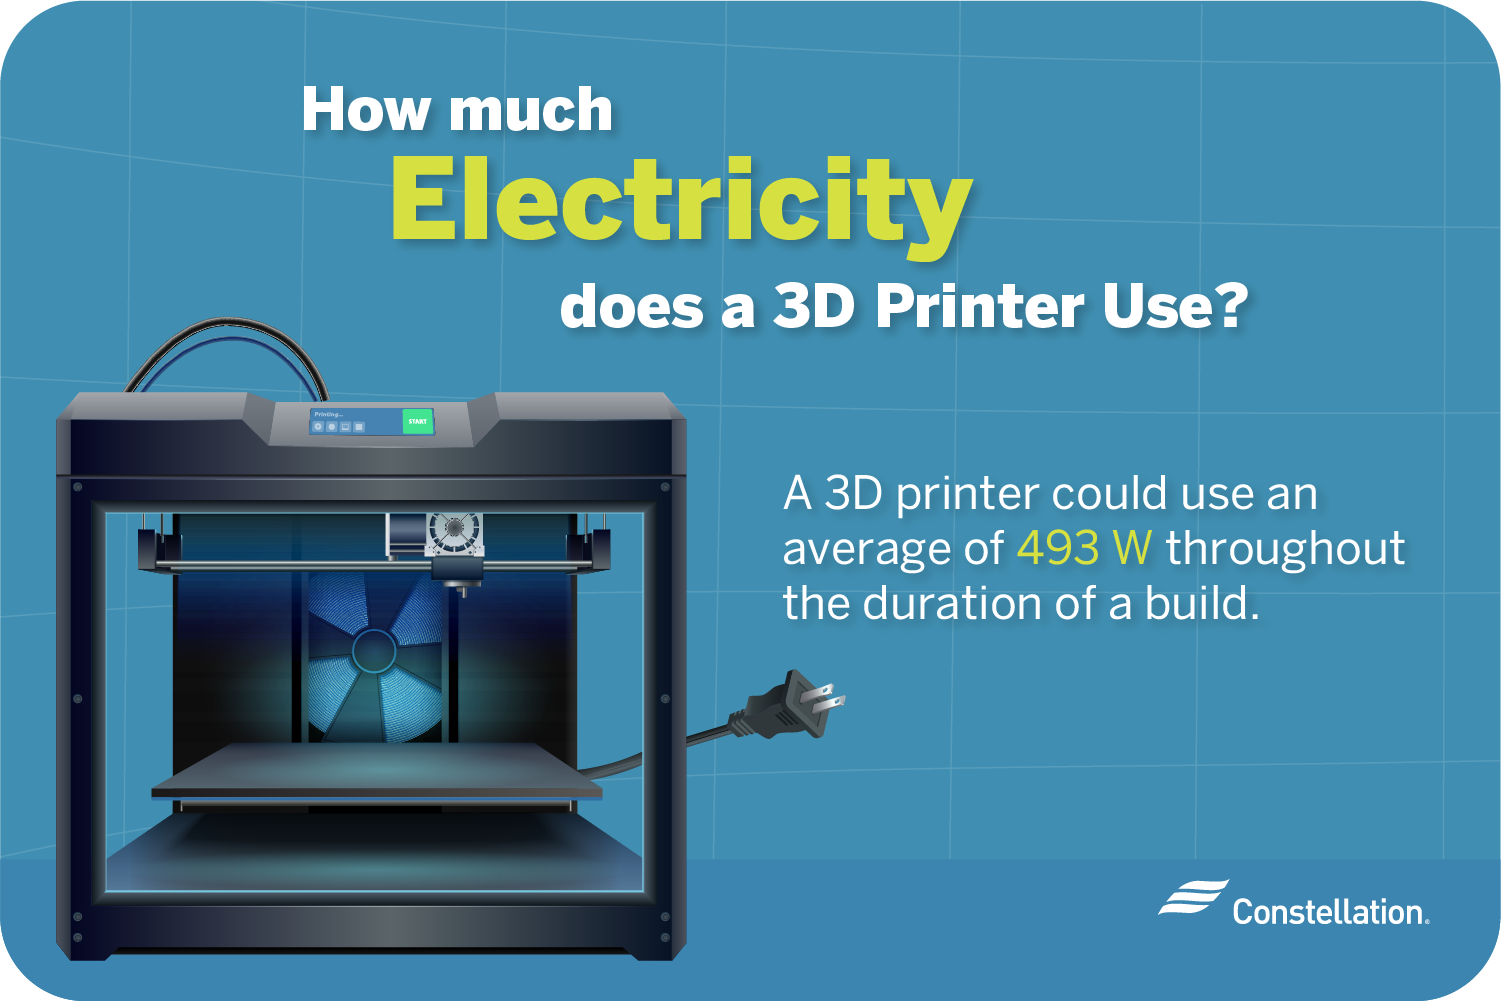 How much electricity does a 3D printer use